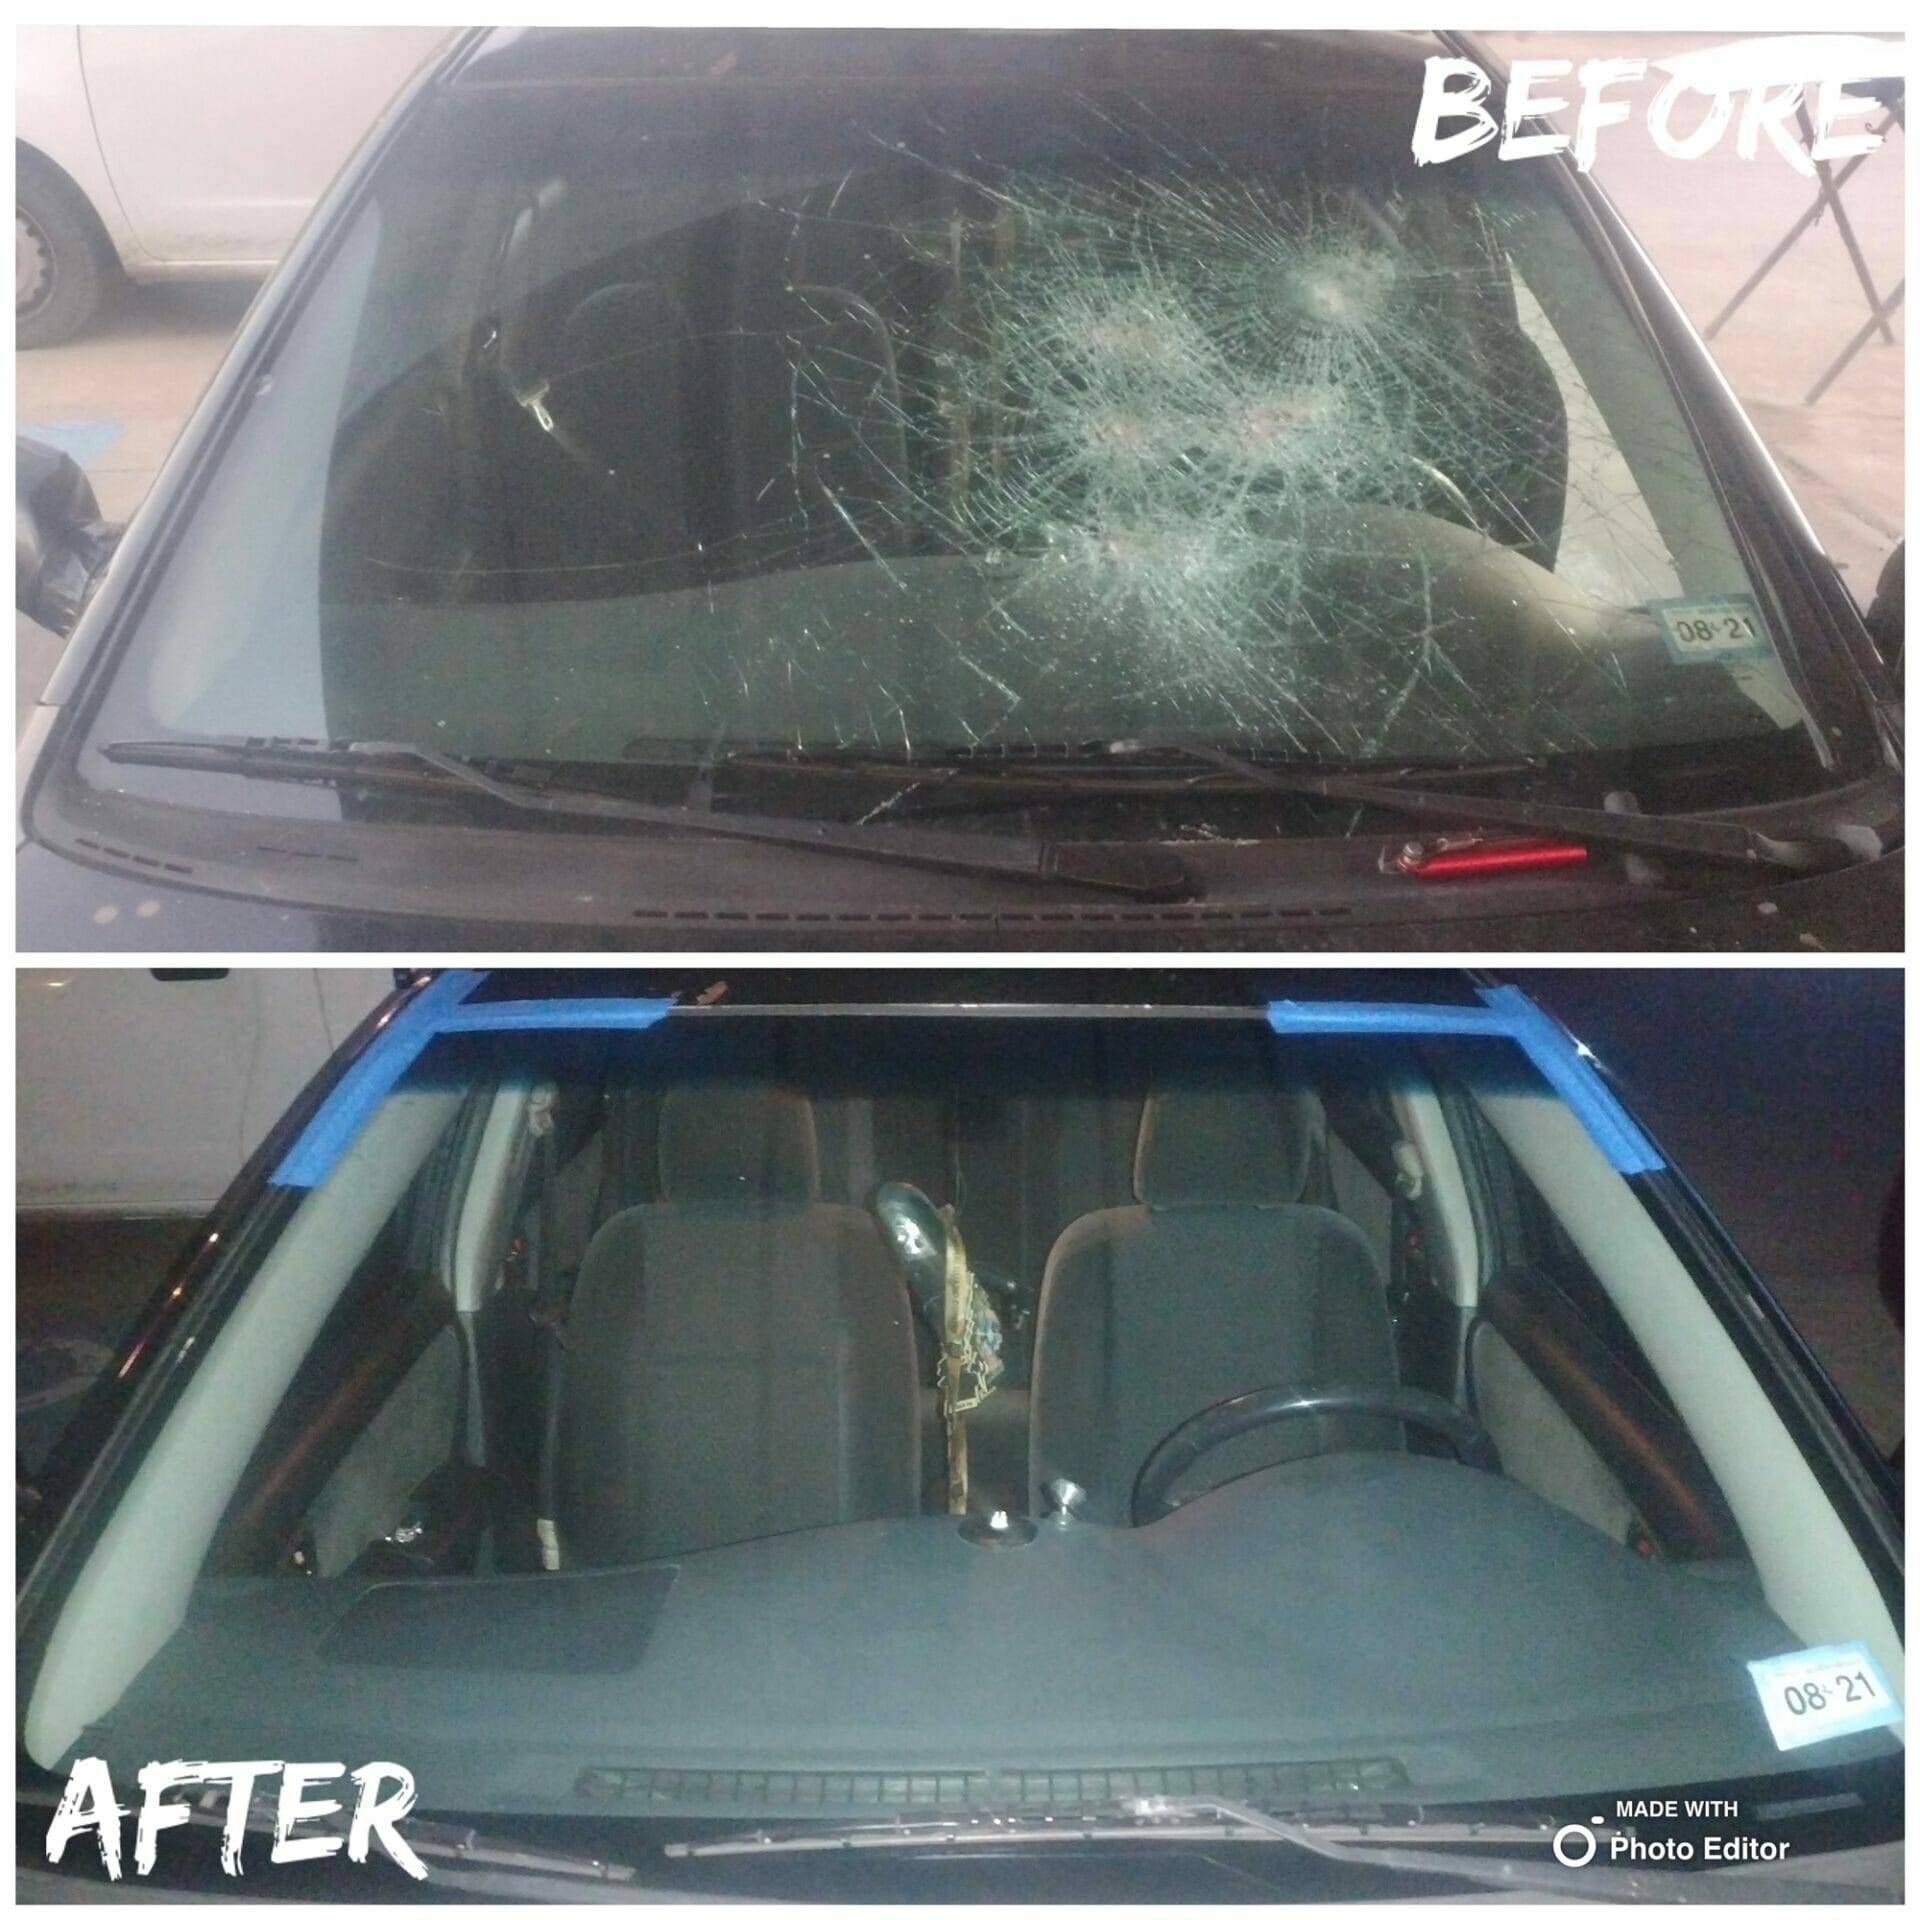 This before and after image showcases the effective repair of a sedan's front windshield in Converse, Texas. The top half features the damaged glass, broken due to several rock impacts. The bottom half presents the sedan after the repair, fitted with a new, clear, and intact windshield, highlighting the quality and effectiveness of our windshield replacement service in the Converse area.